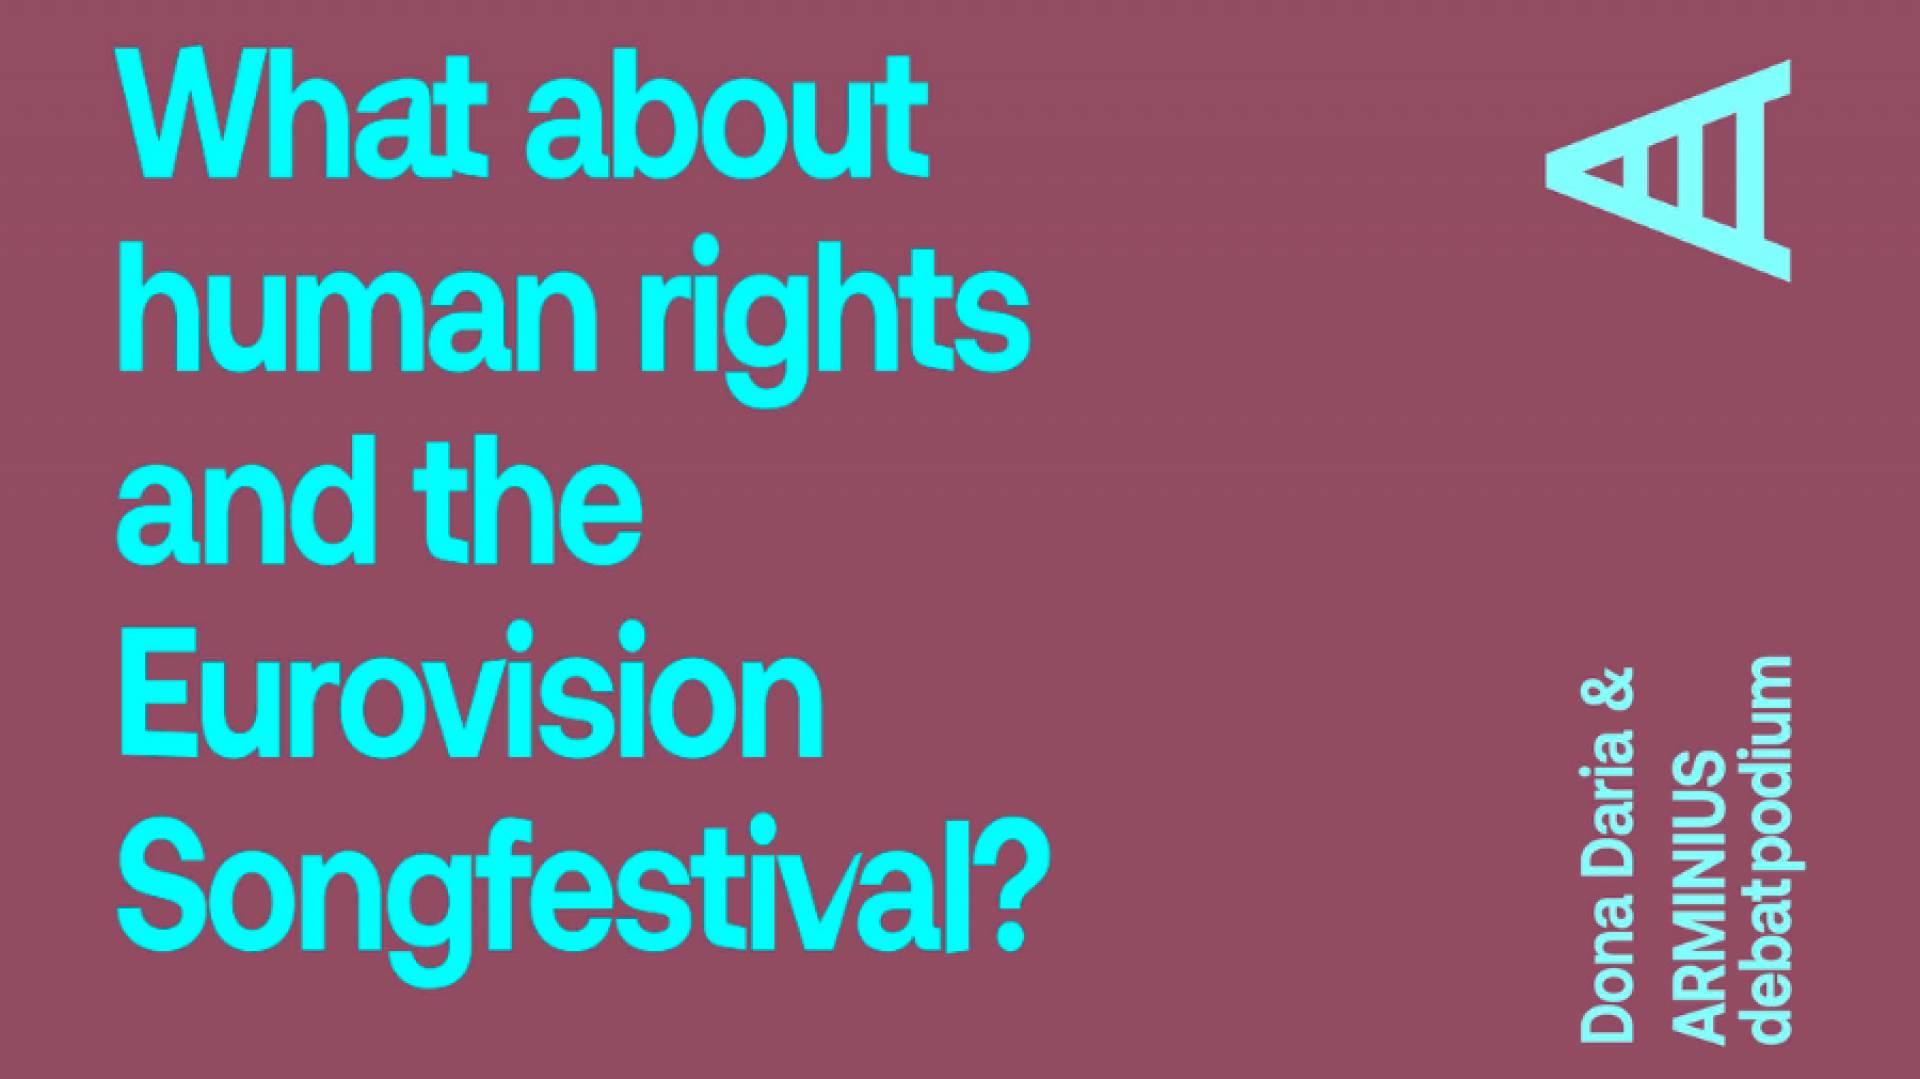 Songfestival: Open Up to Human Rights